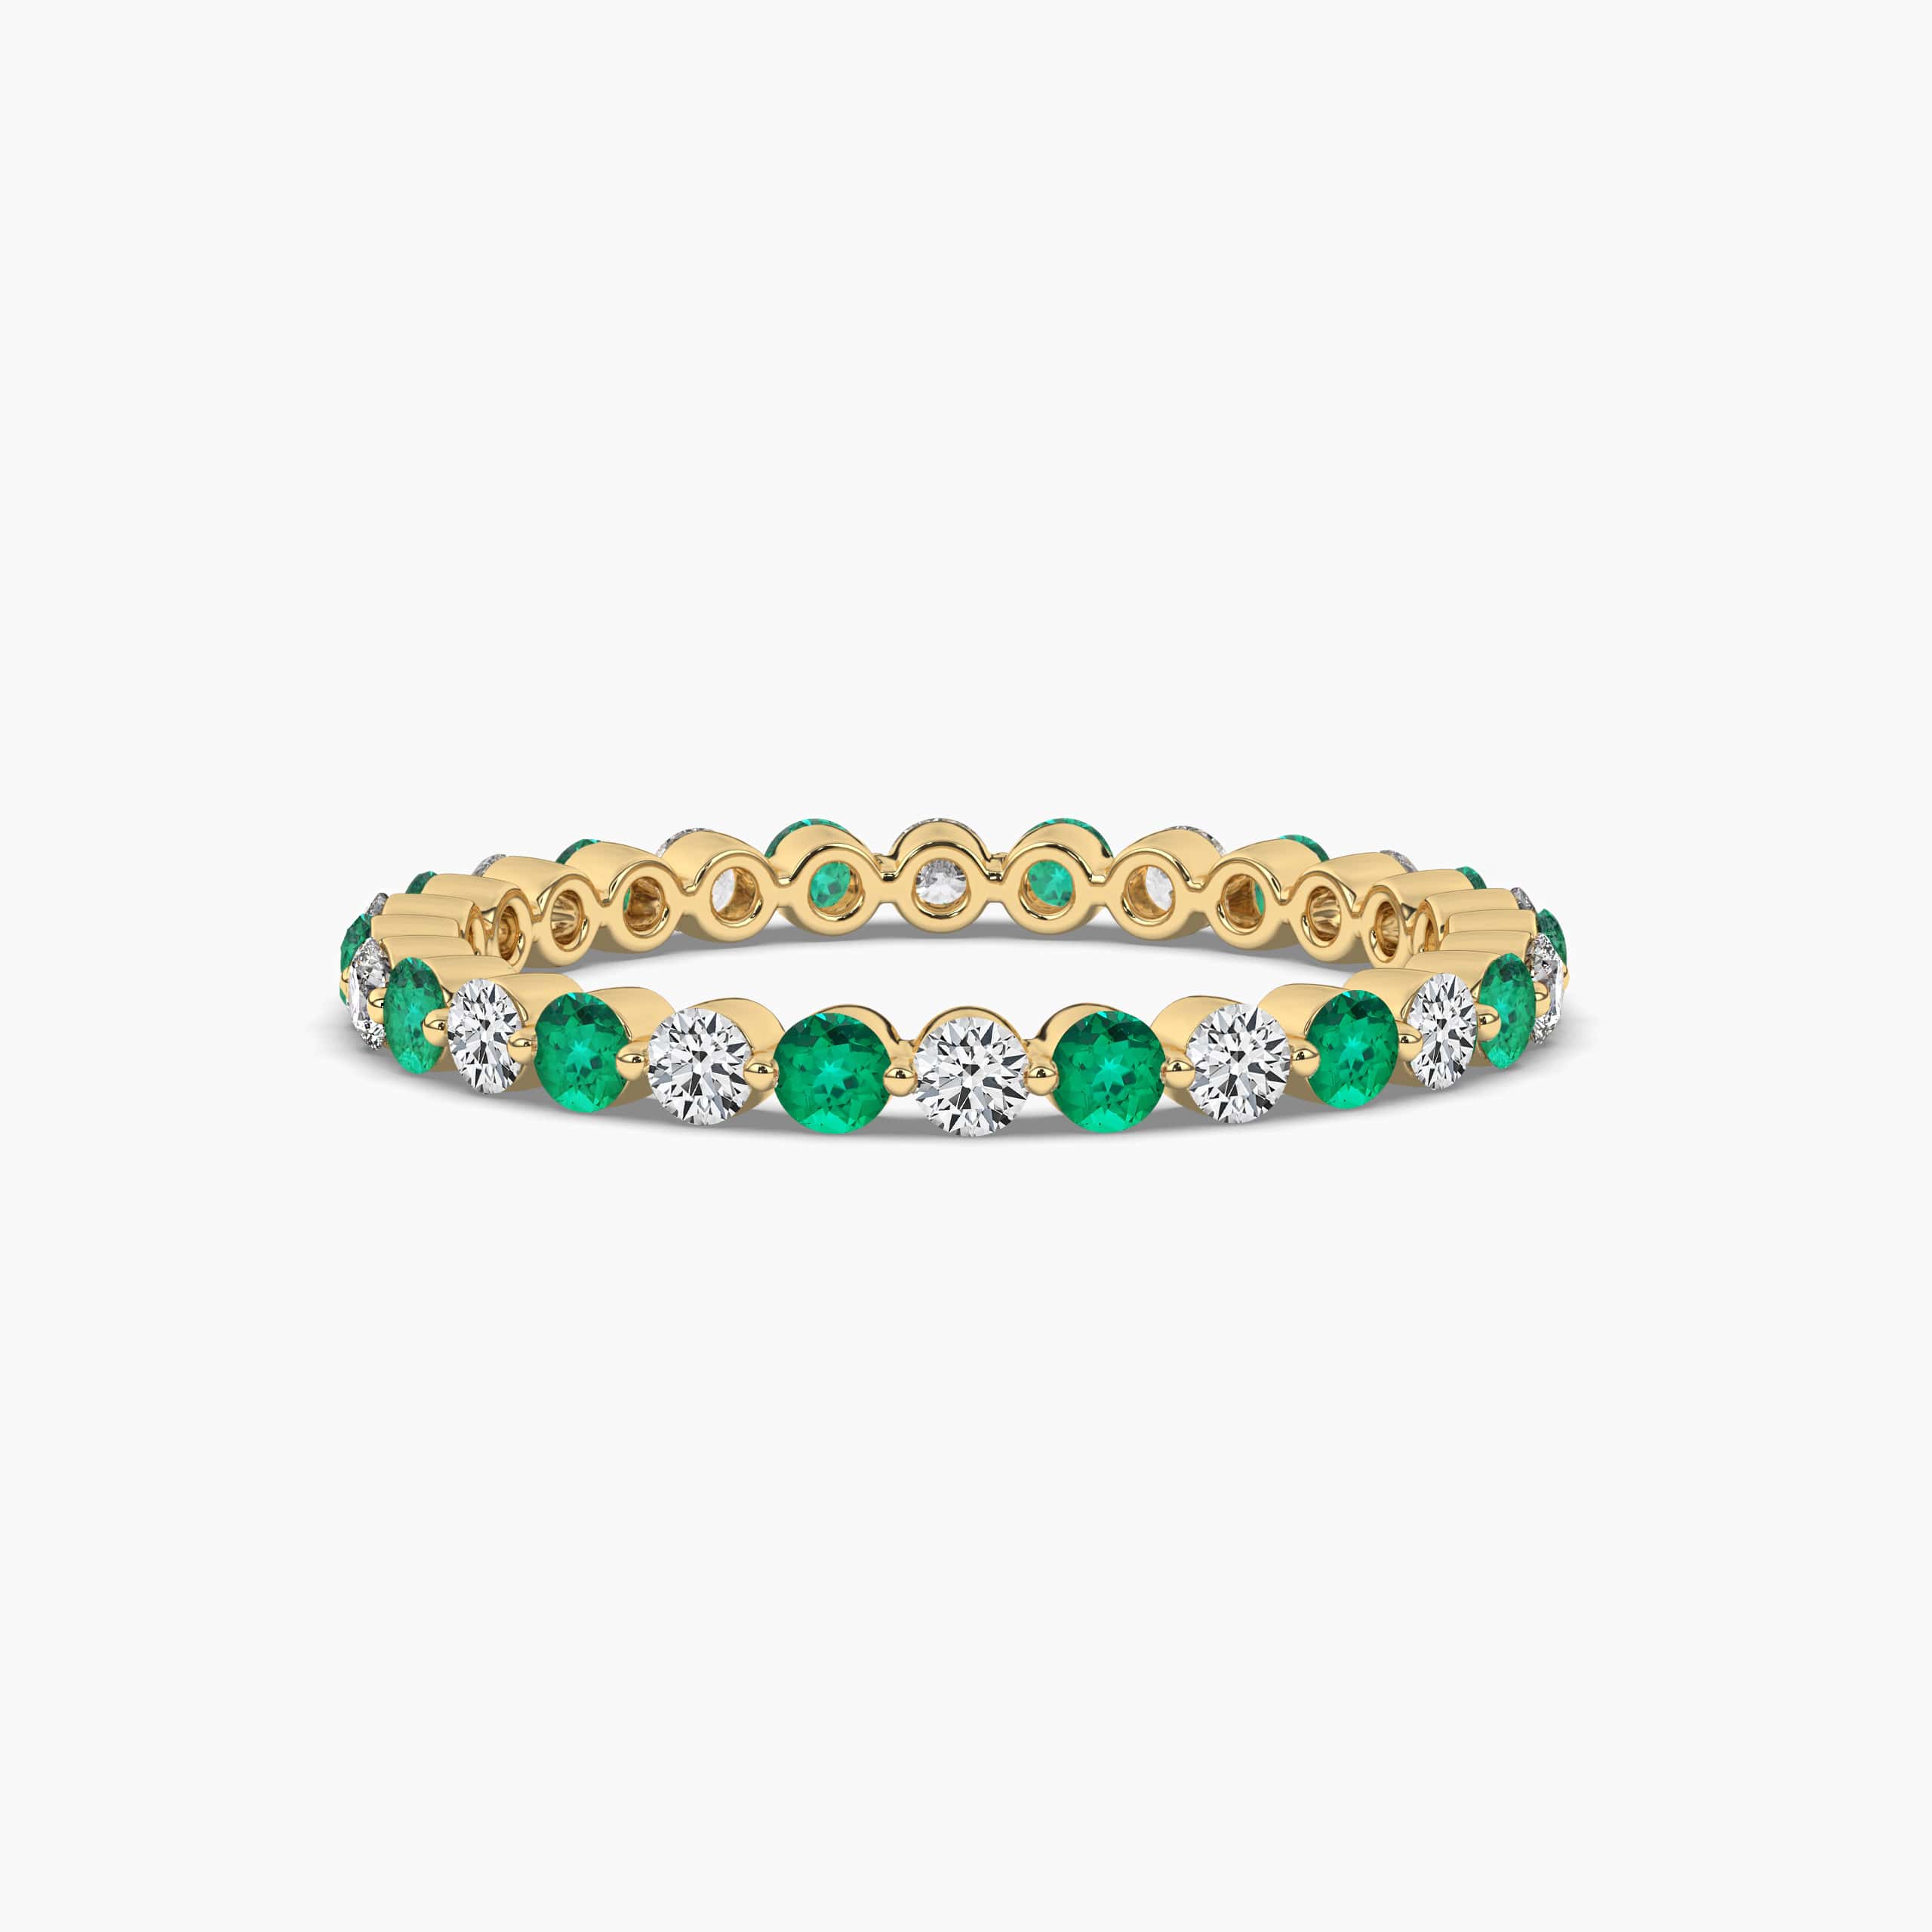 ROUND CUT DIAMOND AND EMERALD ETERNITY WEDDING BAND IN YELLOW GOLD